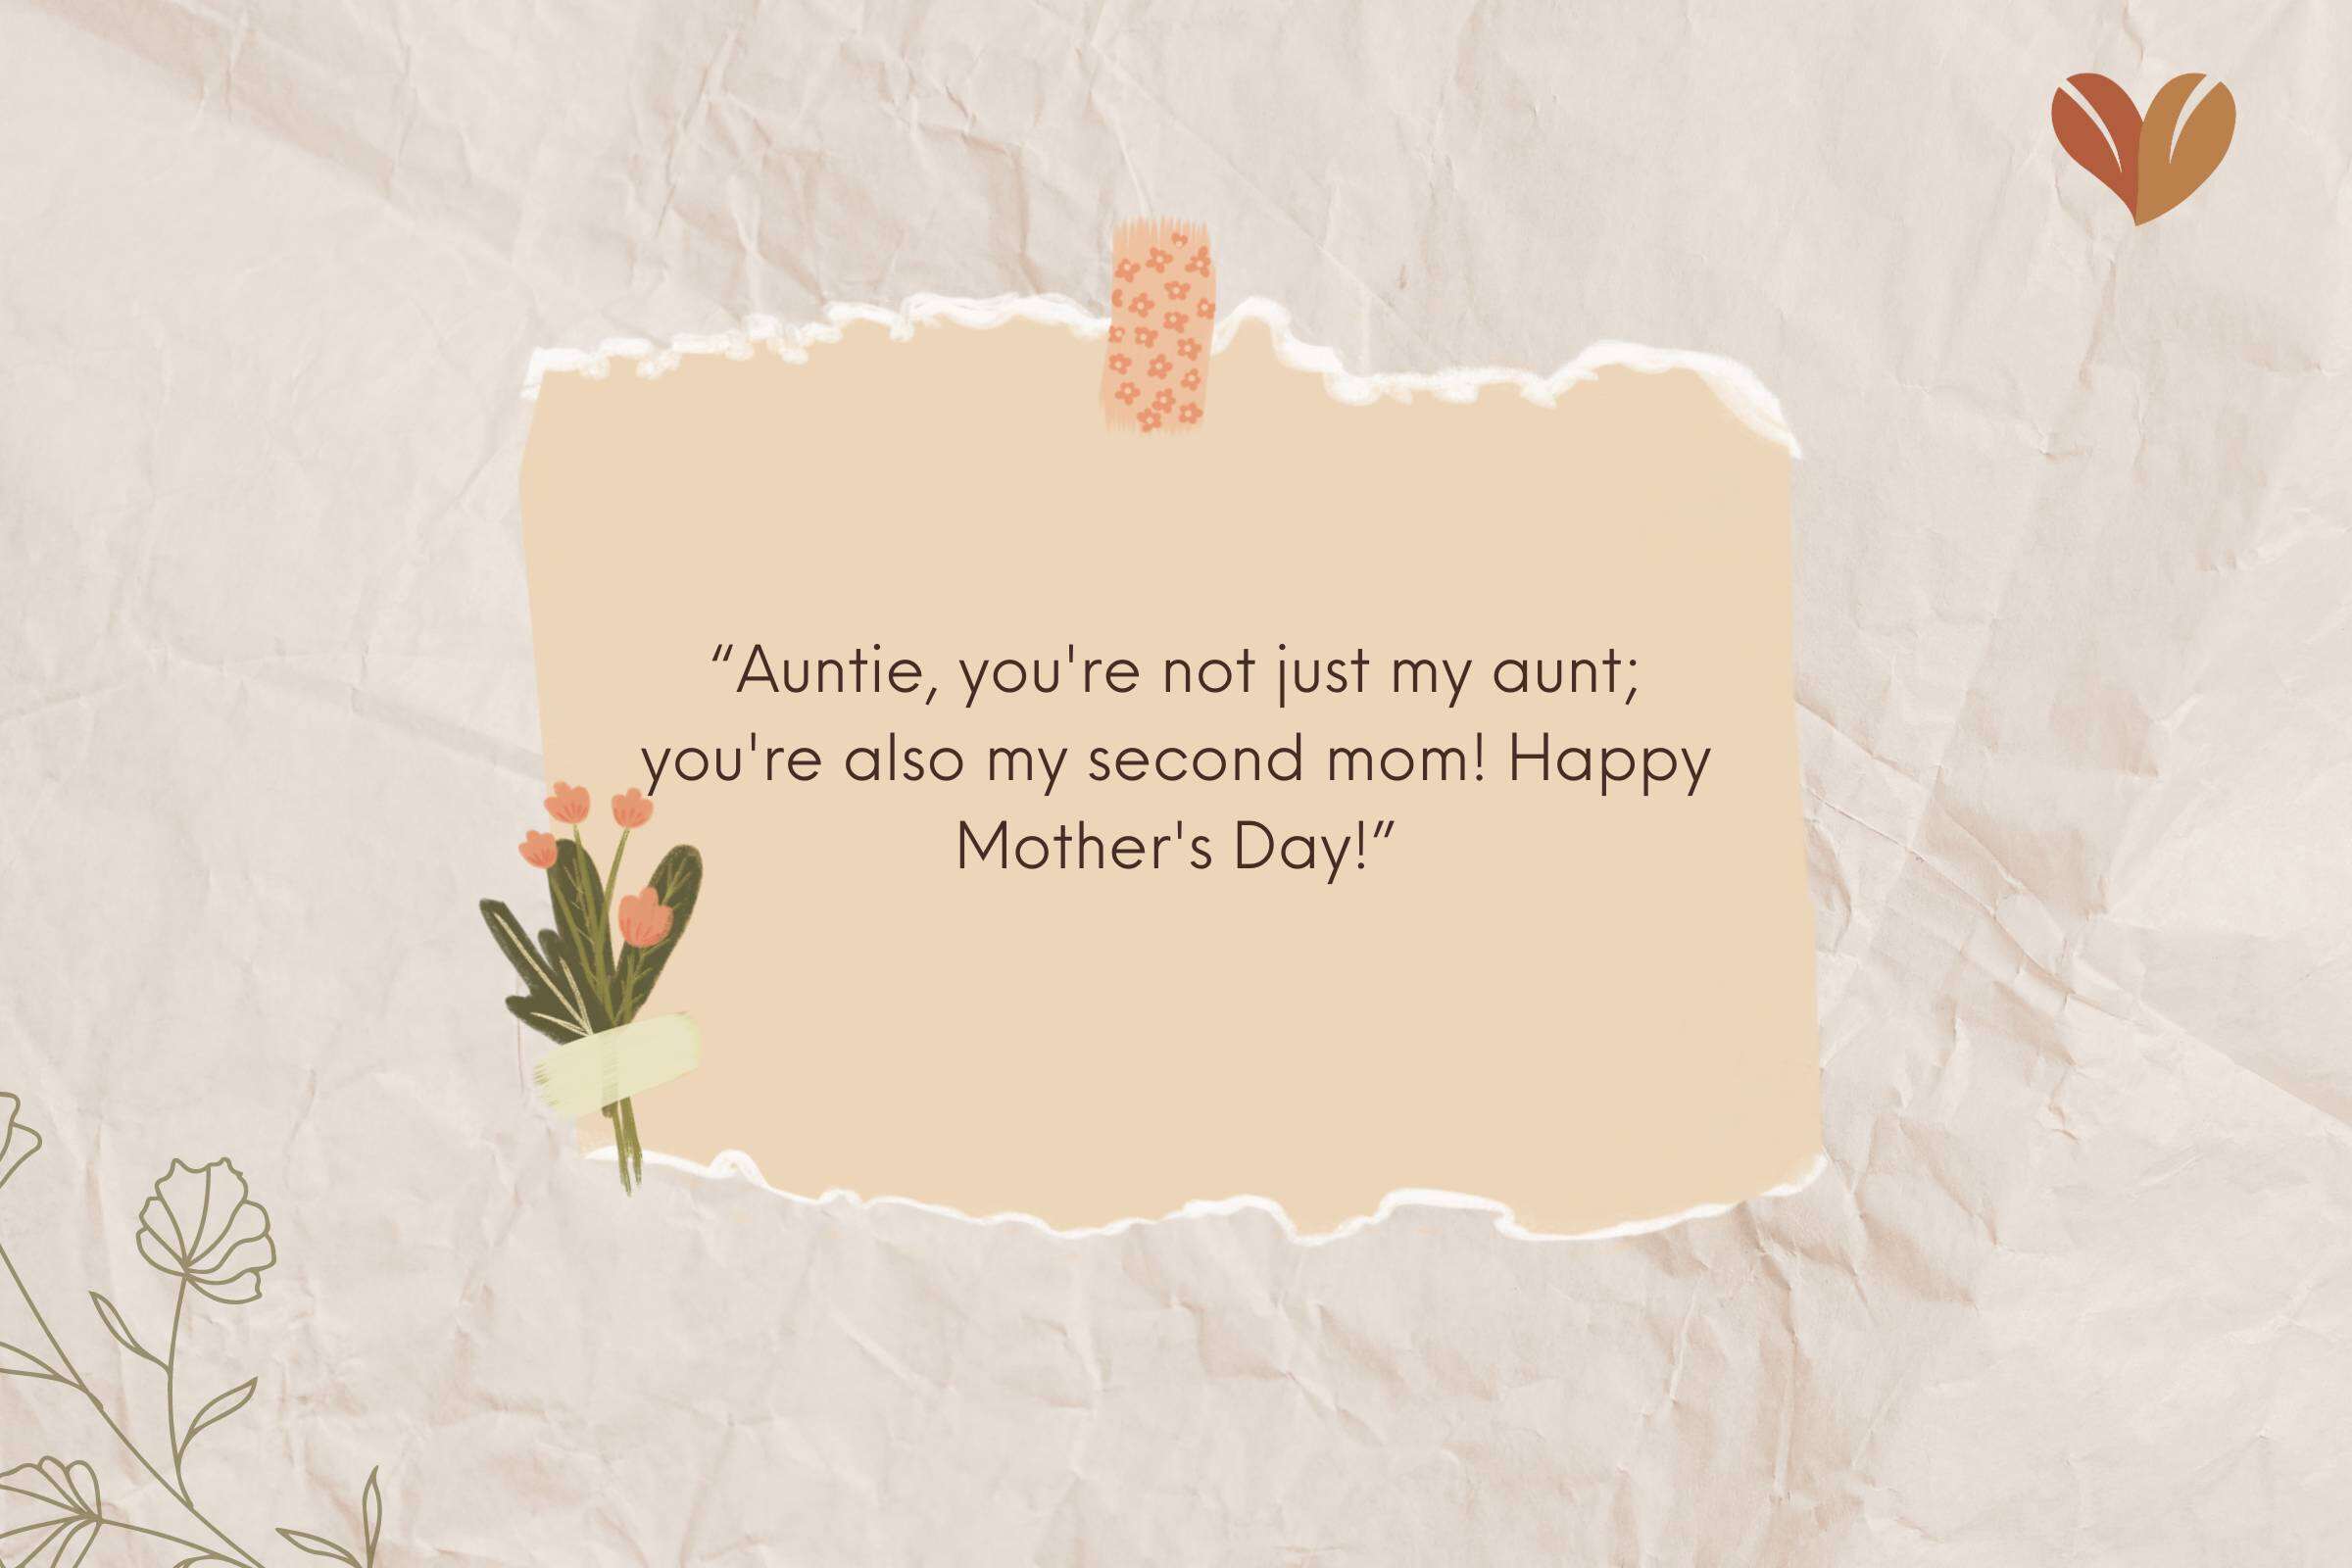 Funny and Heartwarming with Happy Mother's Day to My Aunt Quotes to Make Her Smile 